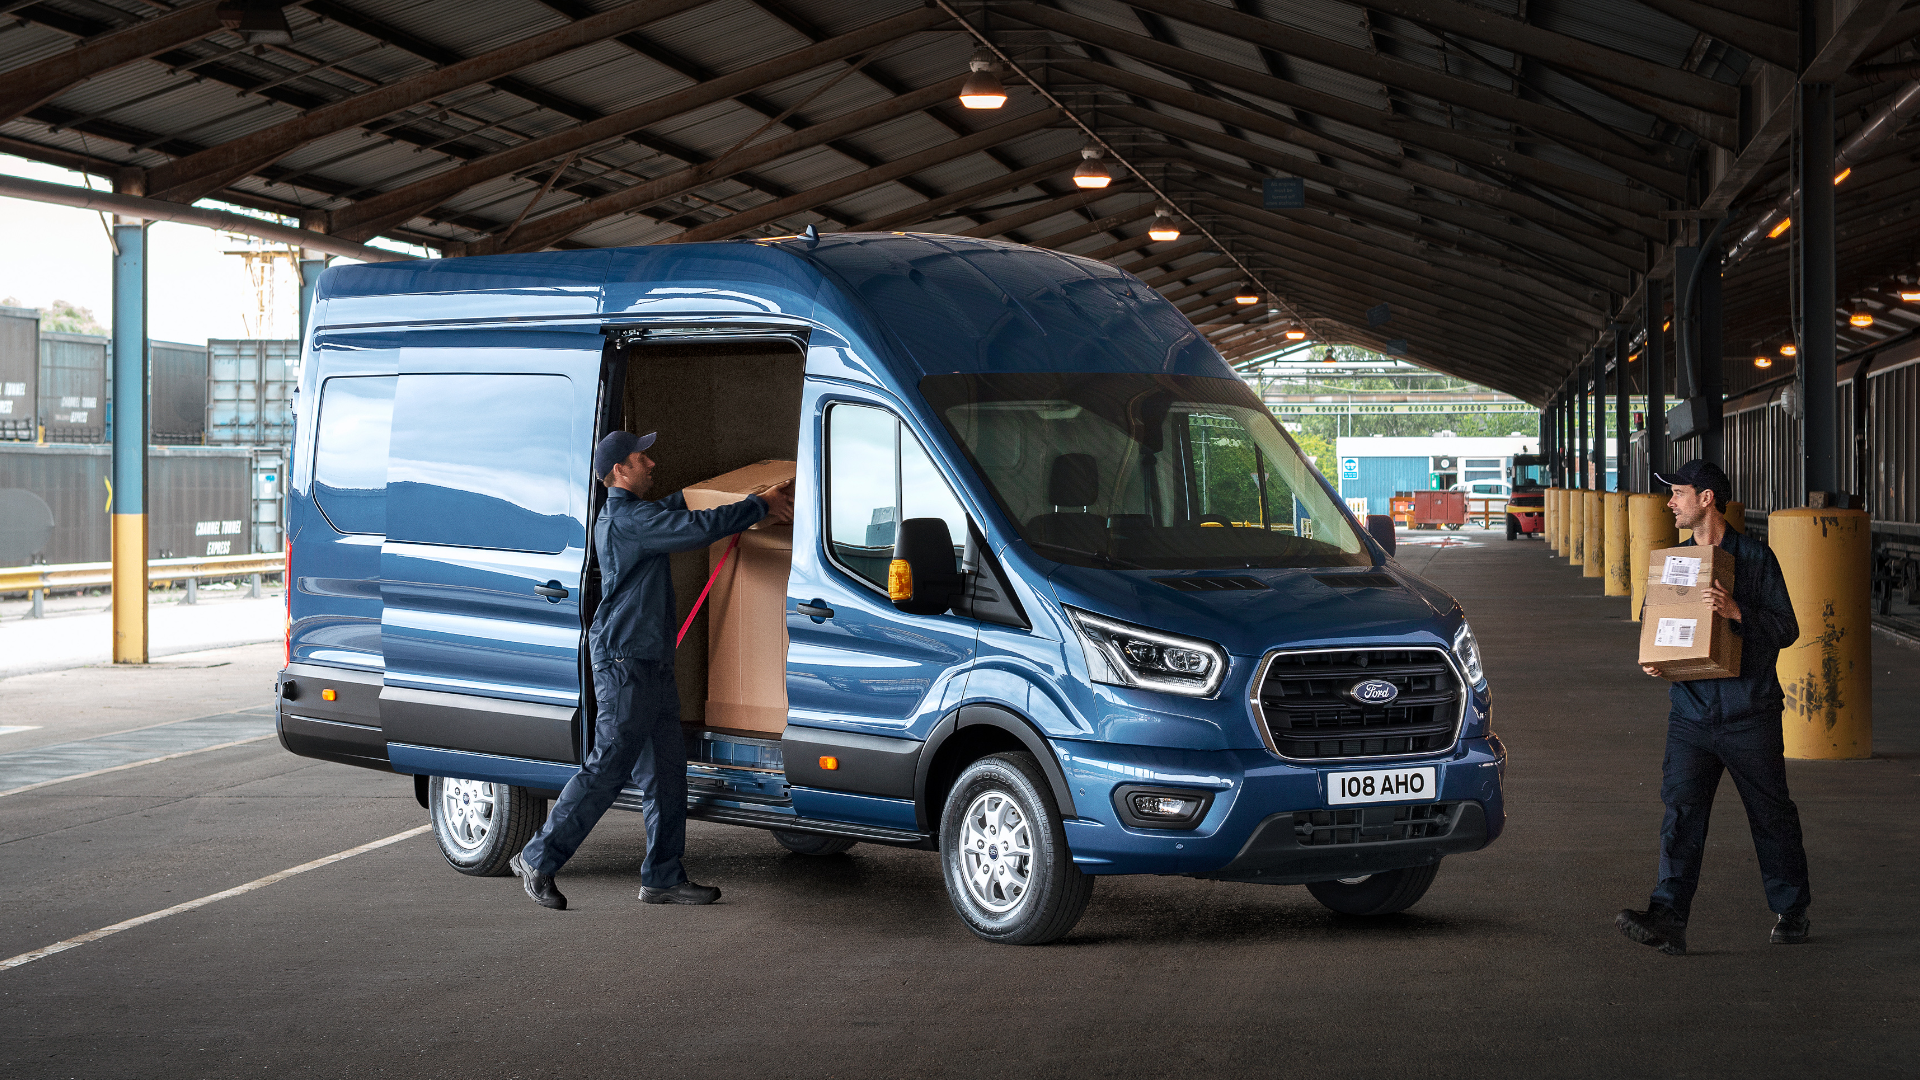 Форд транзит 20. Ford Transit 2019. Ford Transit van 2019. Ford Transit l4h3 2020. Ford Transit v363 фургон.